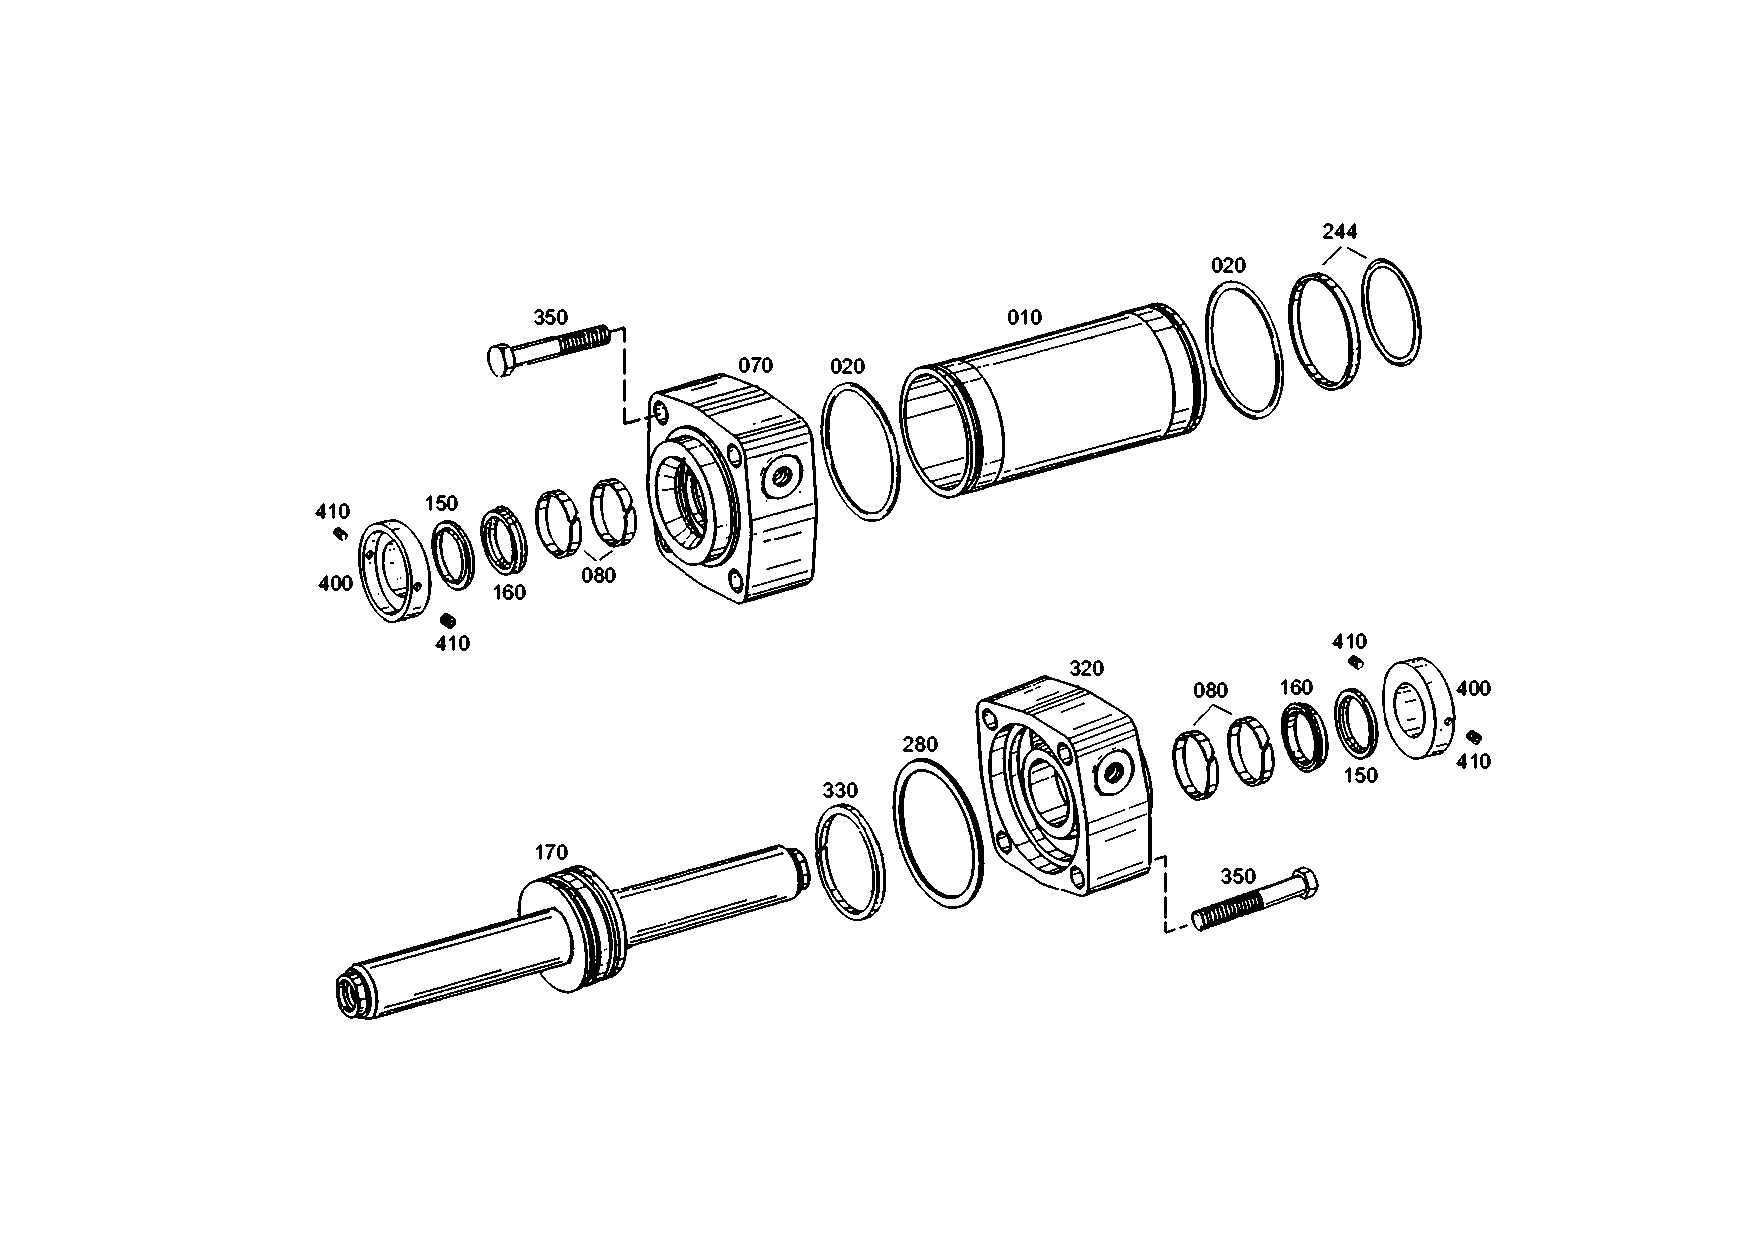 drawing for TREPEL AIRPORT EQUIPMENT GMBH 000,902,0371 - GUIDE RING (figure 3)